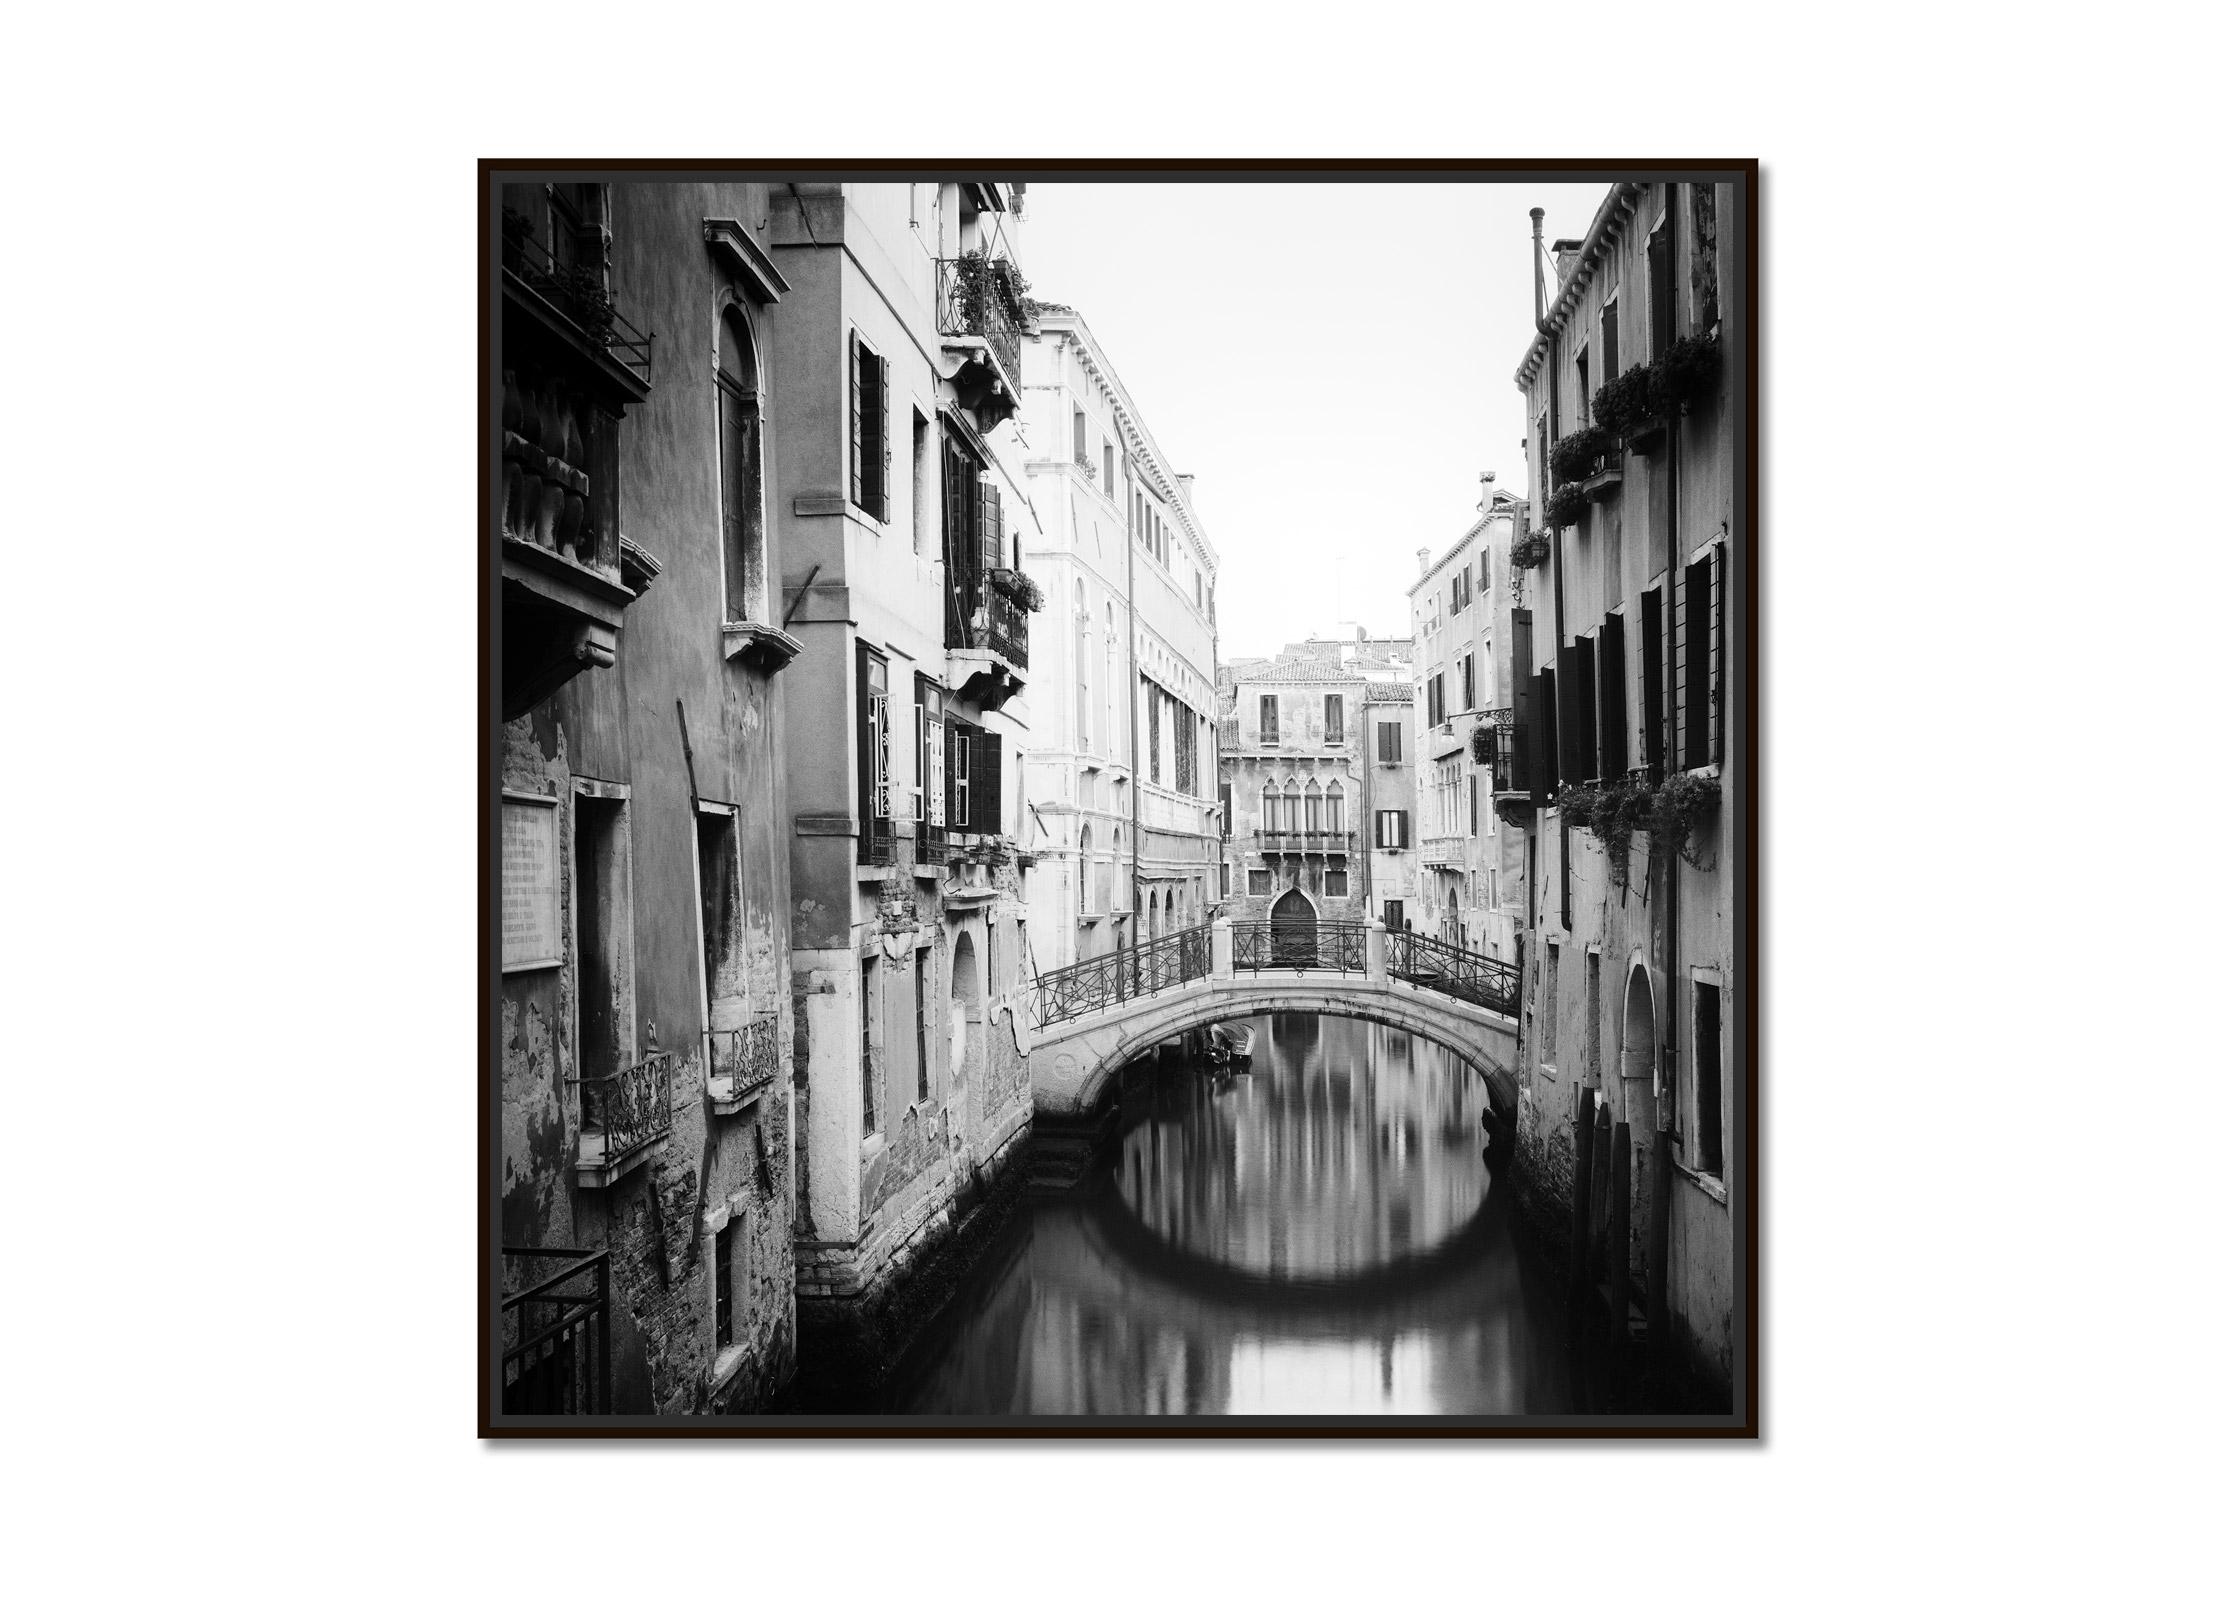 The Bridges of Venice, Italy, black and white, fine art cityscape photography - Photograph by Gerald Berghammer